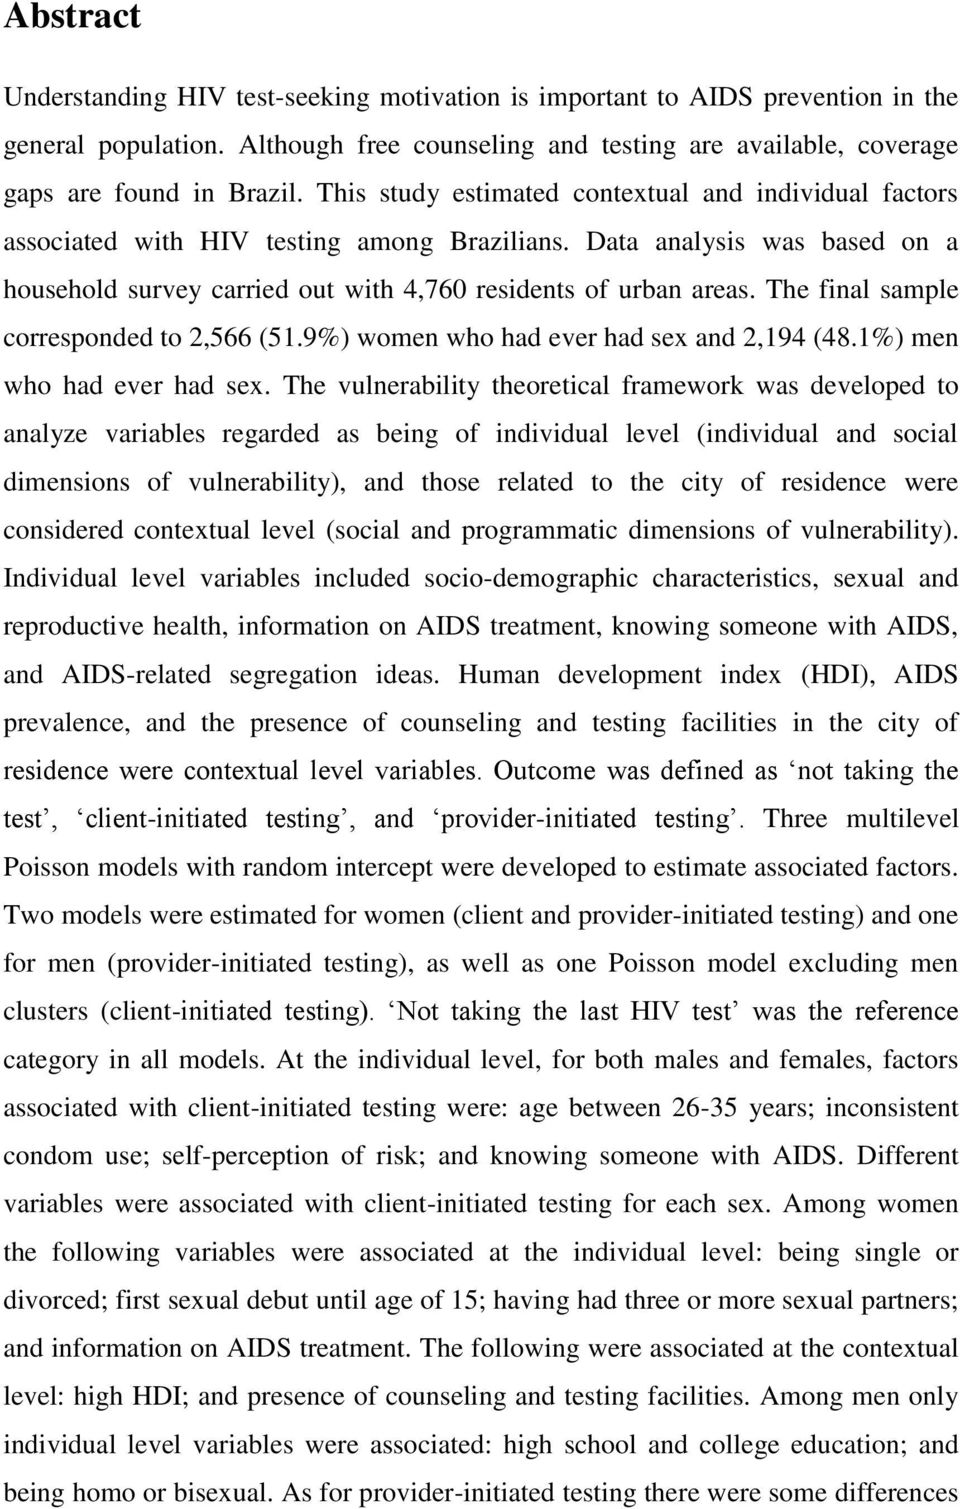 The final sample corresponded to 2,566 (51.9%) women who had ever had sex and 2,194 (48.1%) men who had ever had sex.